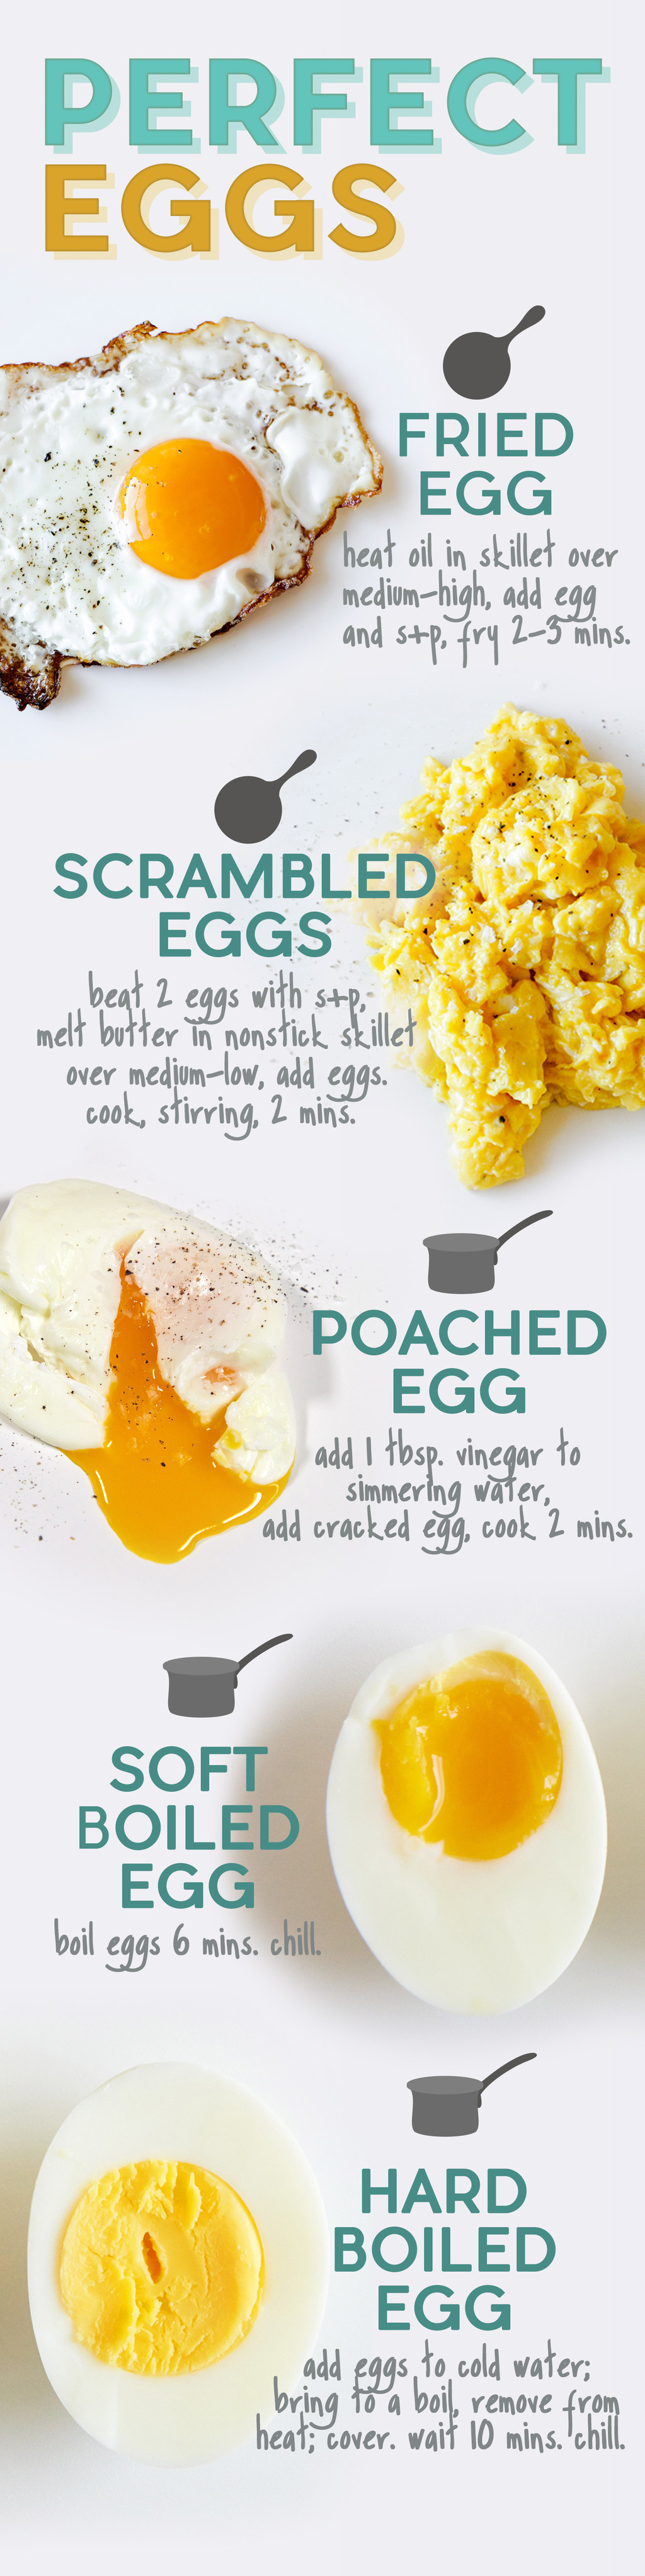 how-to-cook-perfect-eggs